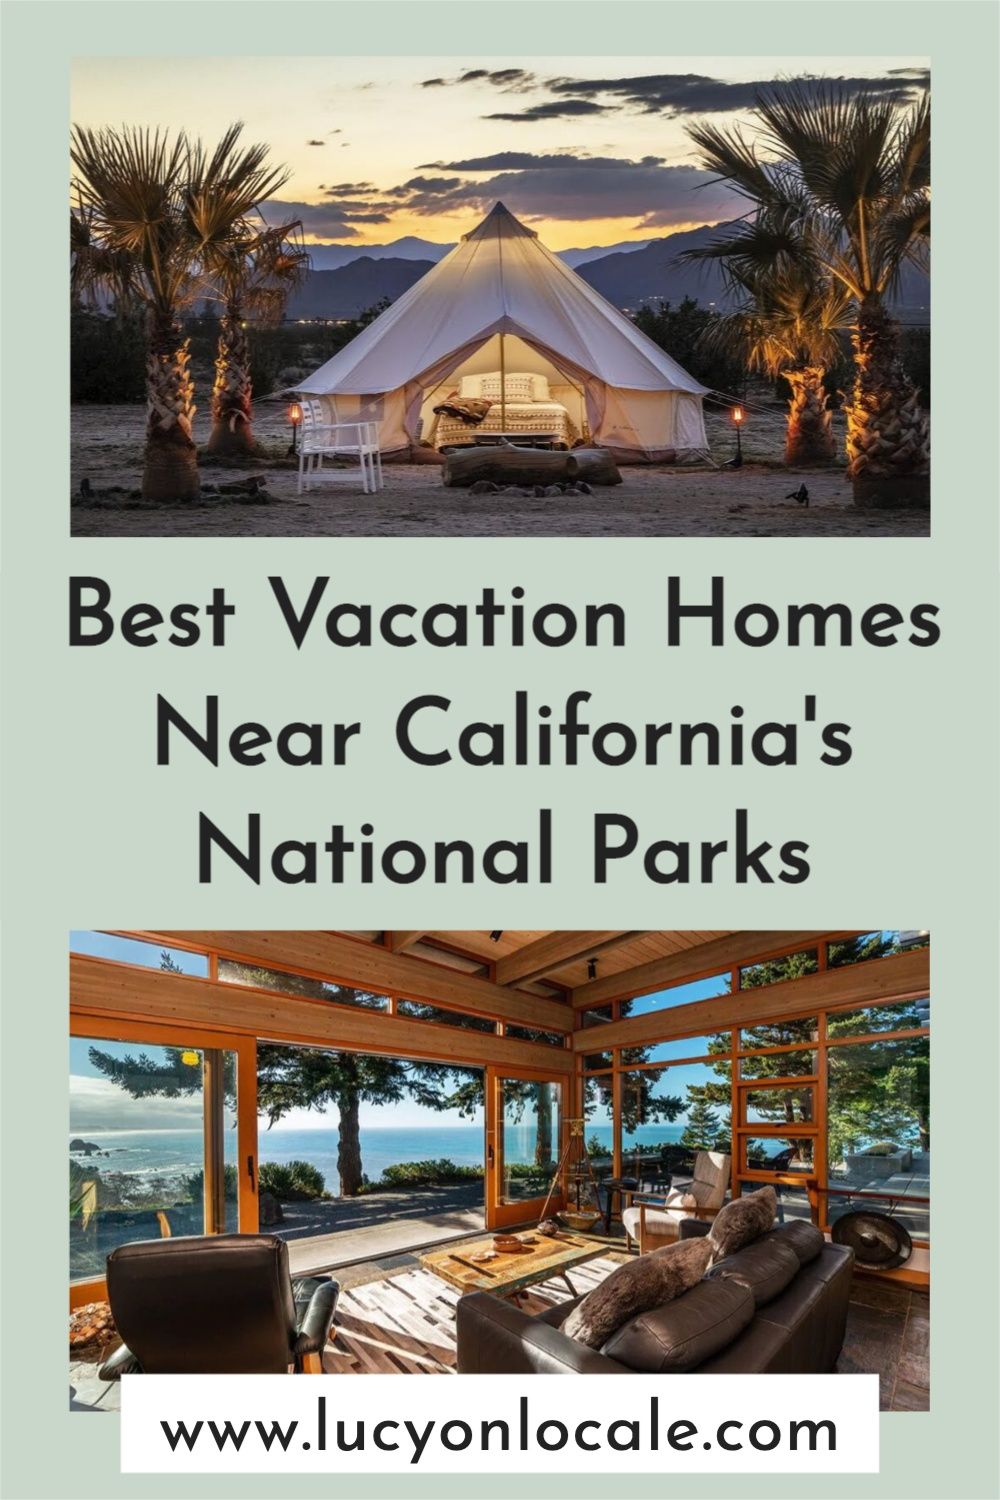 The best vacation homes near California's national parks